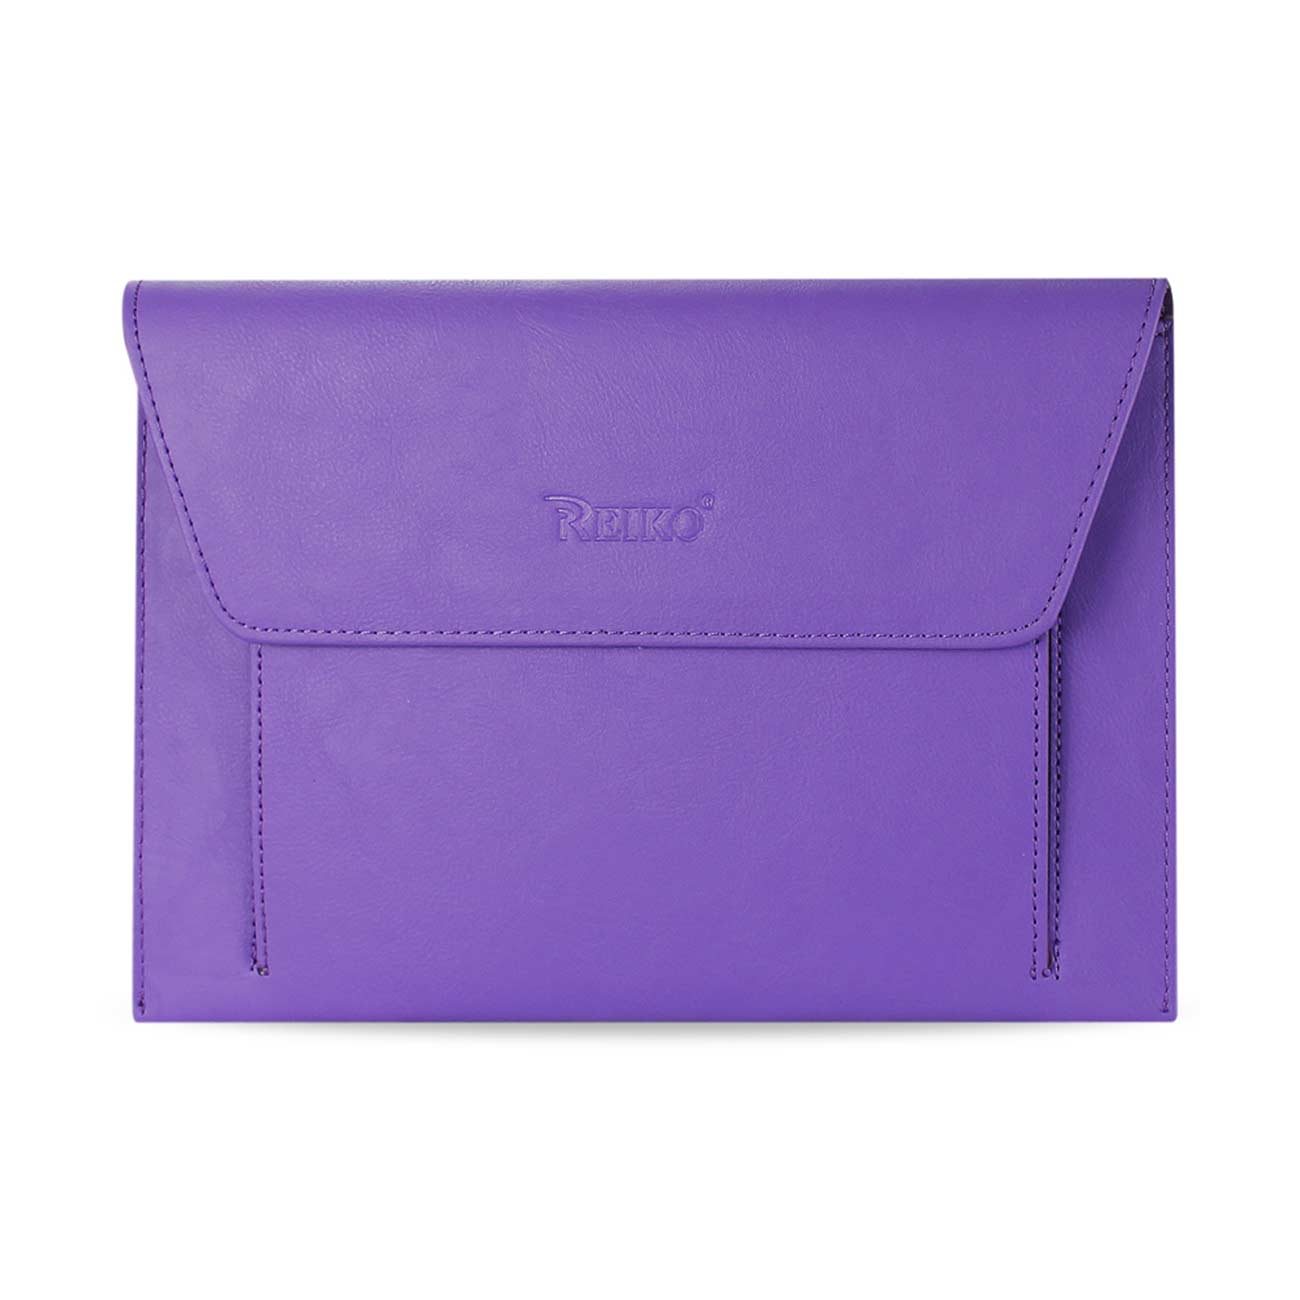 Reiko Premium Leather Case Pouch For 8.2Inches Ipads And Tabletspurple